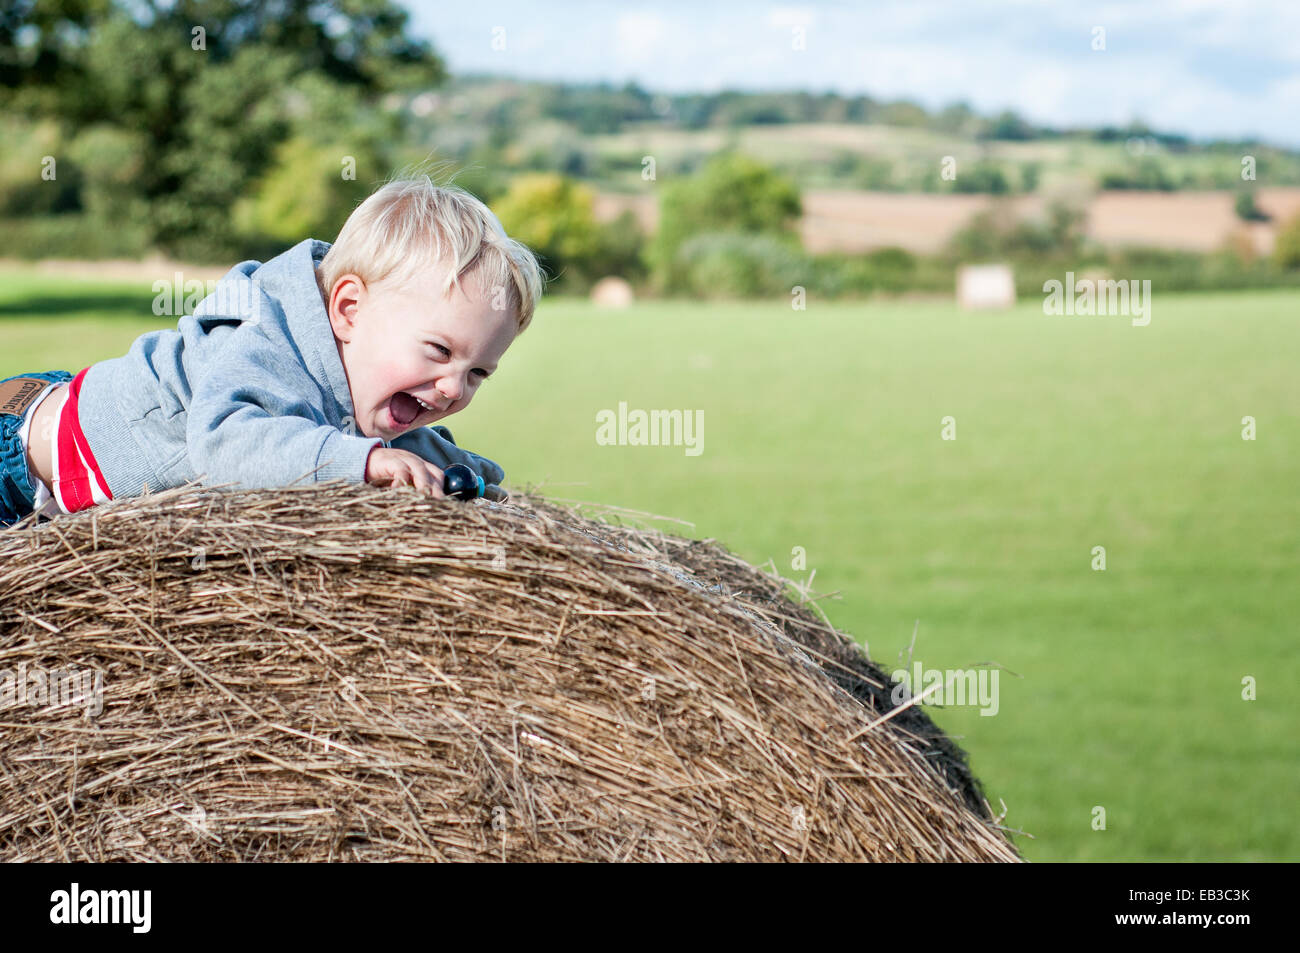 Boy crawling on hay bale laughing Banque D'Images